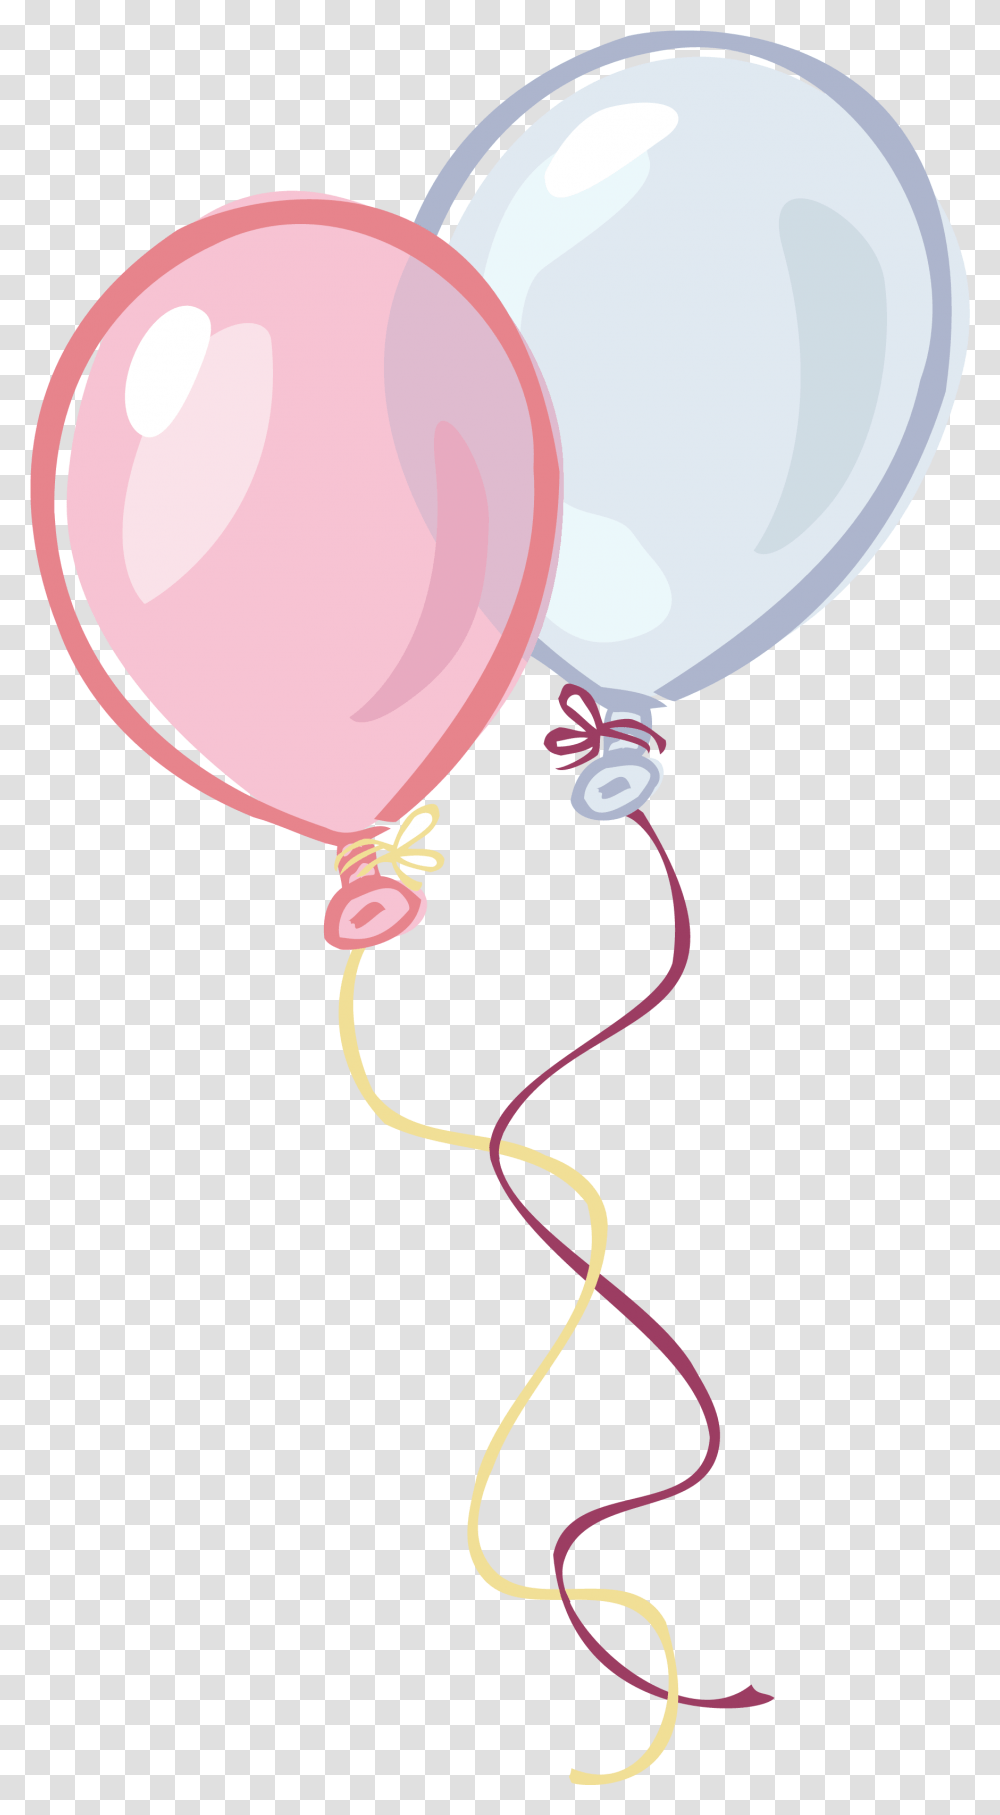 Free Birthday Balloons Download Clip Art Background Pink Balloons Clipart Transparent Png